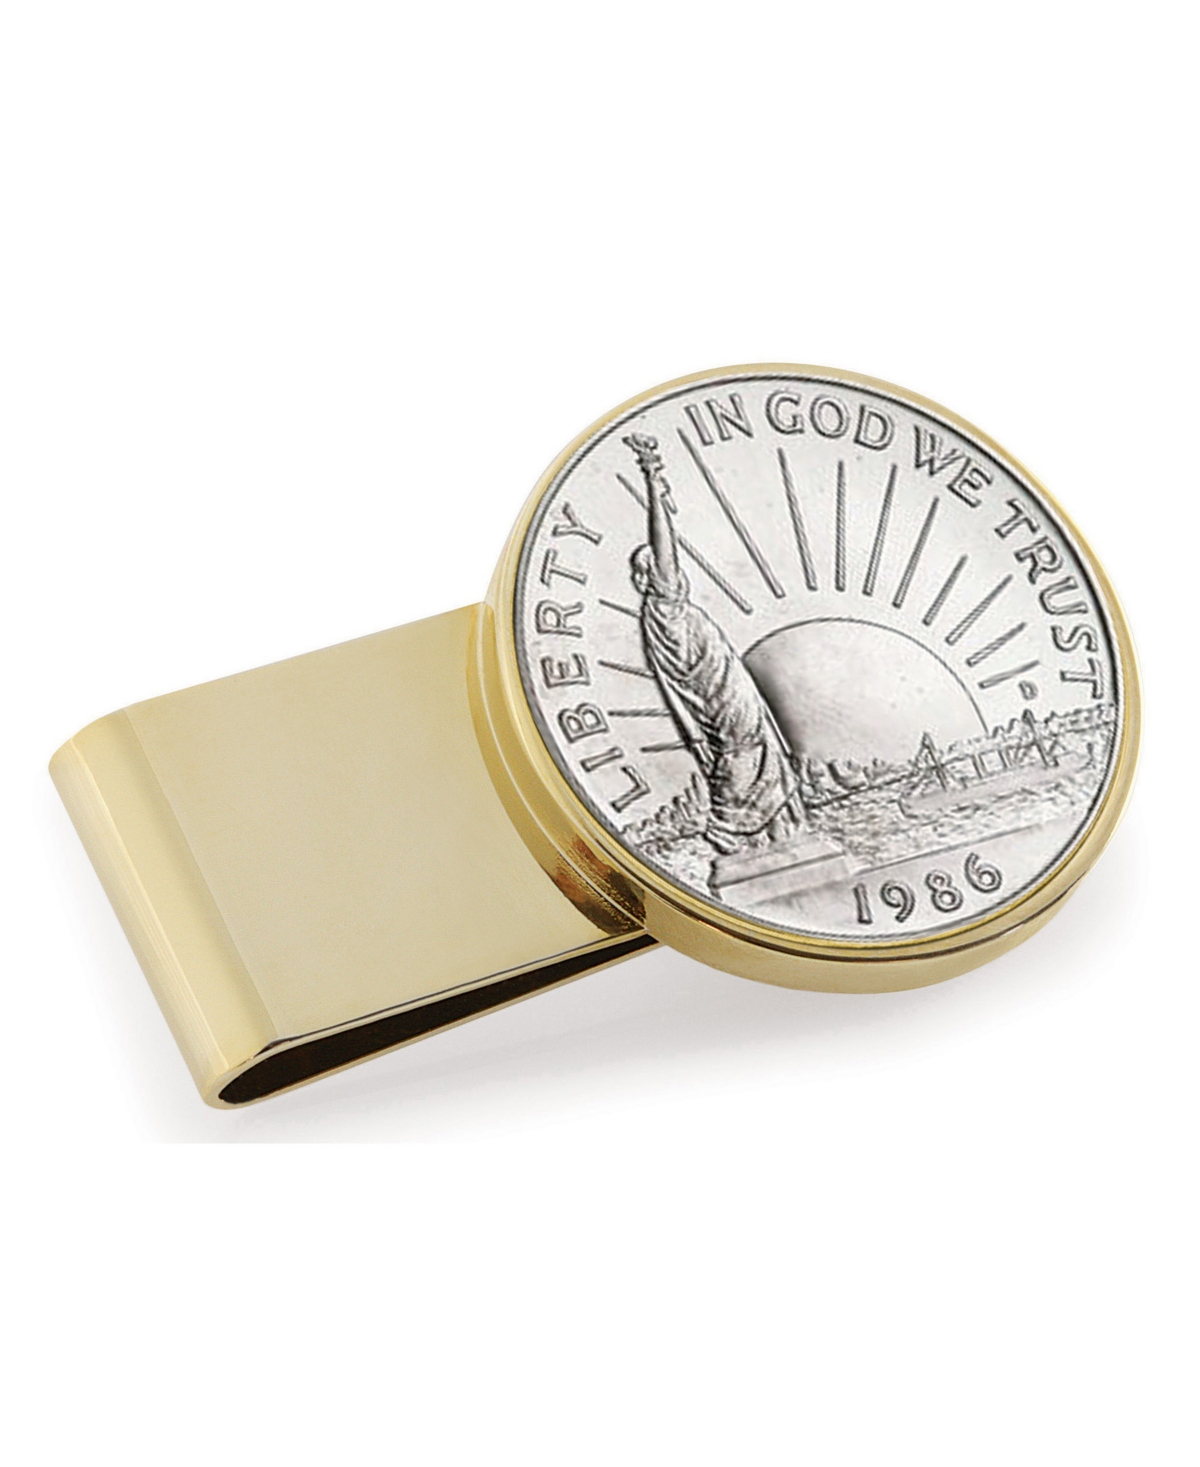 Men's American Coin Treasures Statue of Liberty Commemorative Half Dollar Stainless Steel Coin Money Clip - Gold